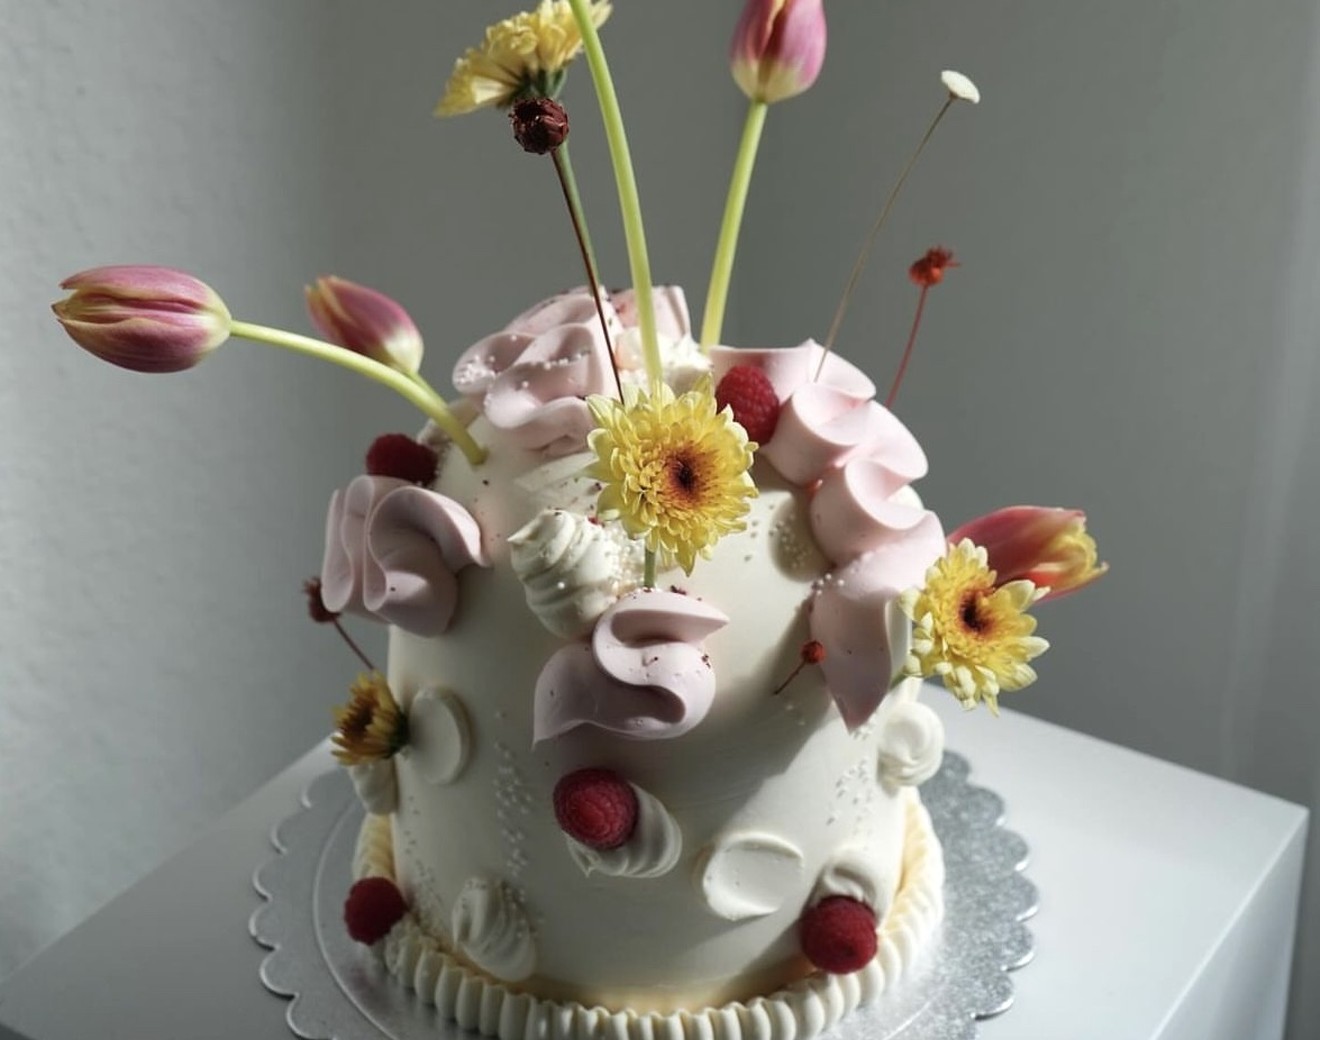 Lura Cakes by Laura Caceres are taking over social media thanks to its floral designs with natural elements, unique shapes, and shockingly beautiful composition.